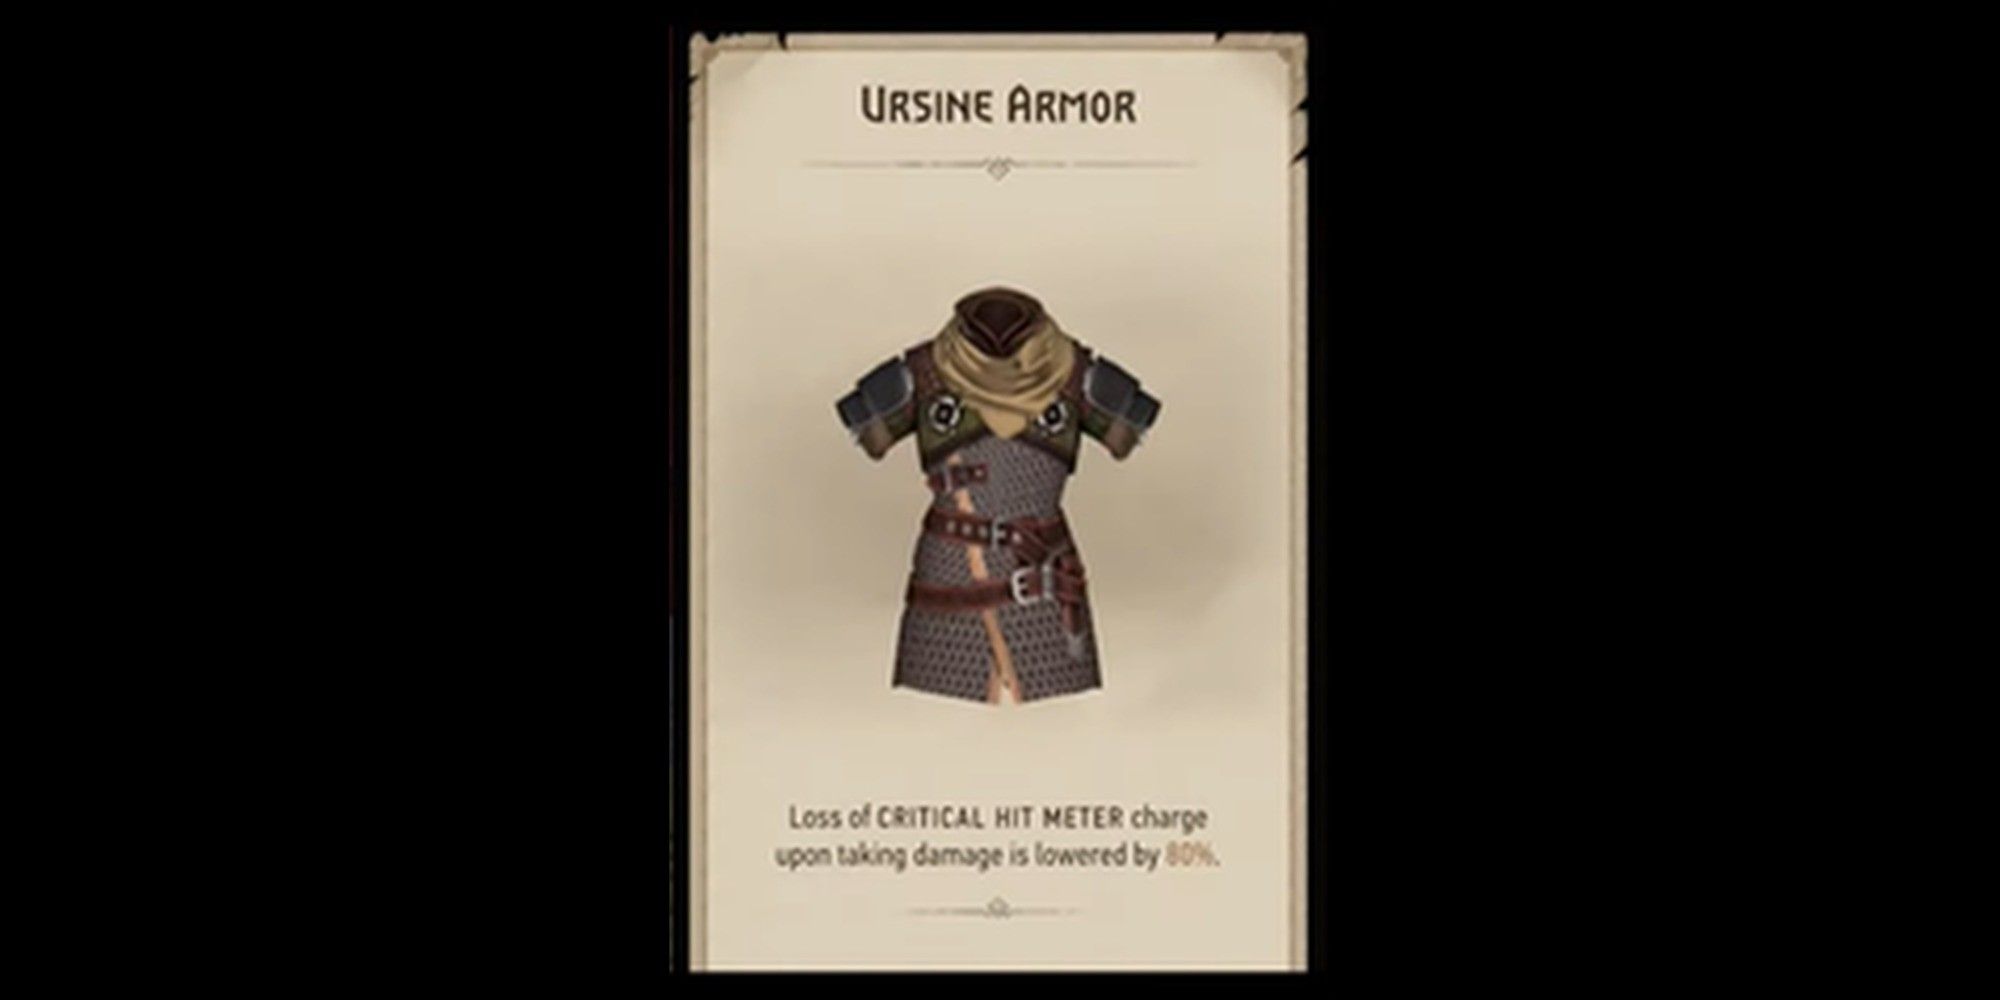 Every Armor In The Witcher Monster Slayer Ranked